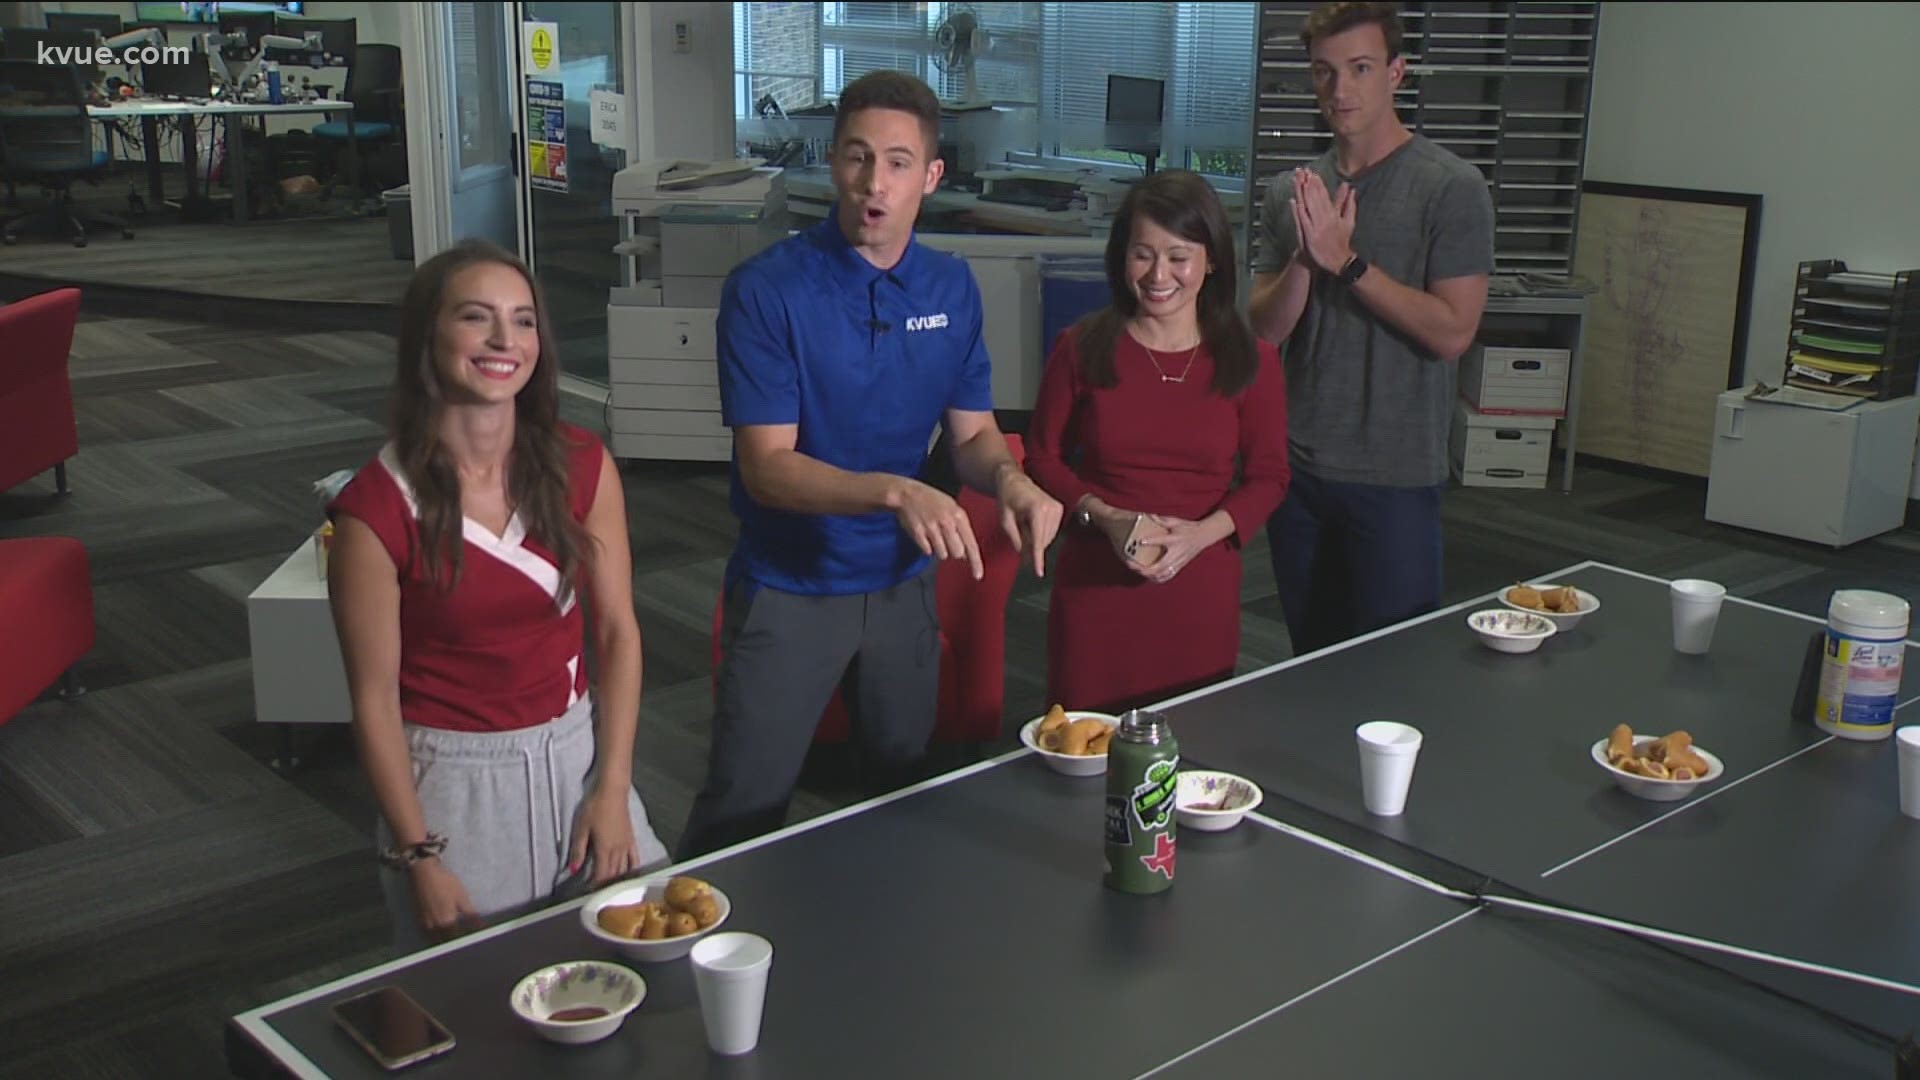 In honor of Nathan's Hot Dog eating contest, KVUE wanted to find out who was the Joey Chestnut of the newsroom with a corndog eating contest. Who do you think won?